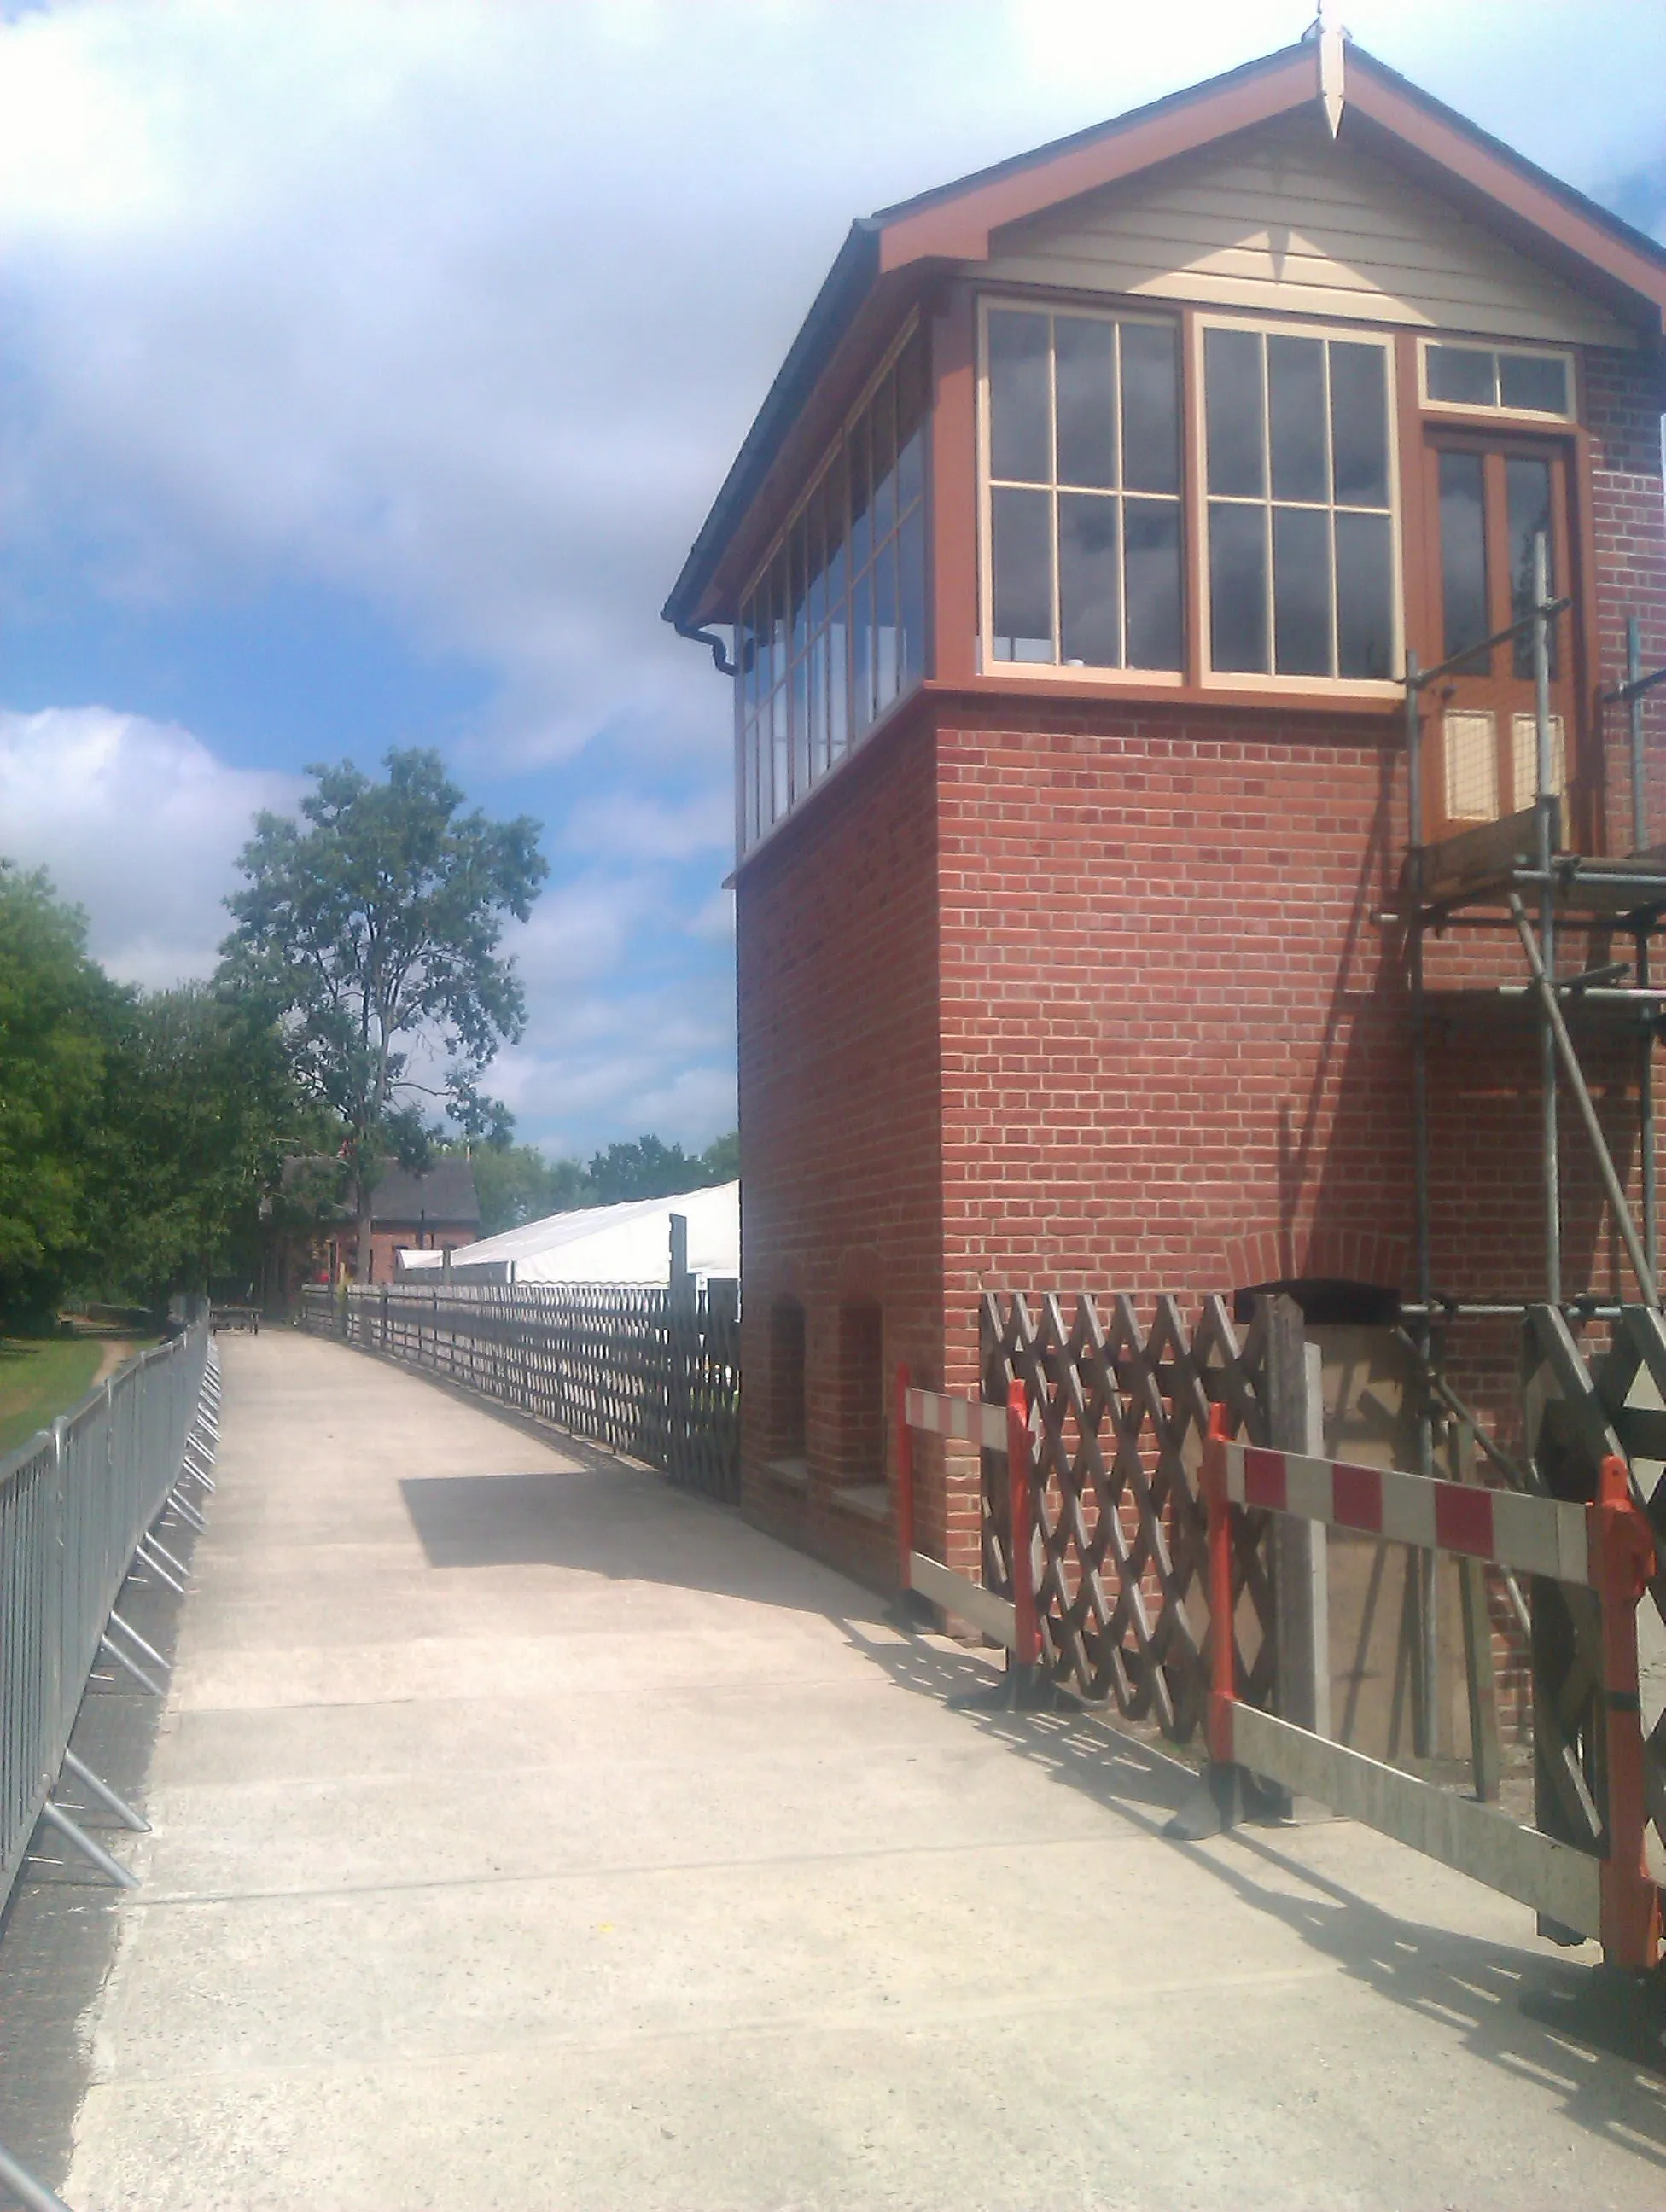 Photo showing: Whitwell signal box, Norfolk.
Own work.